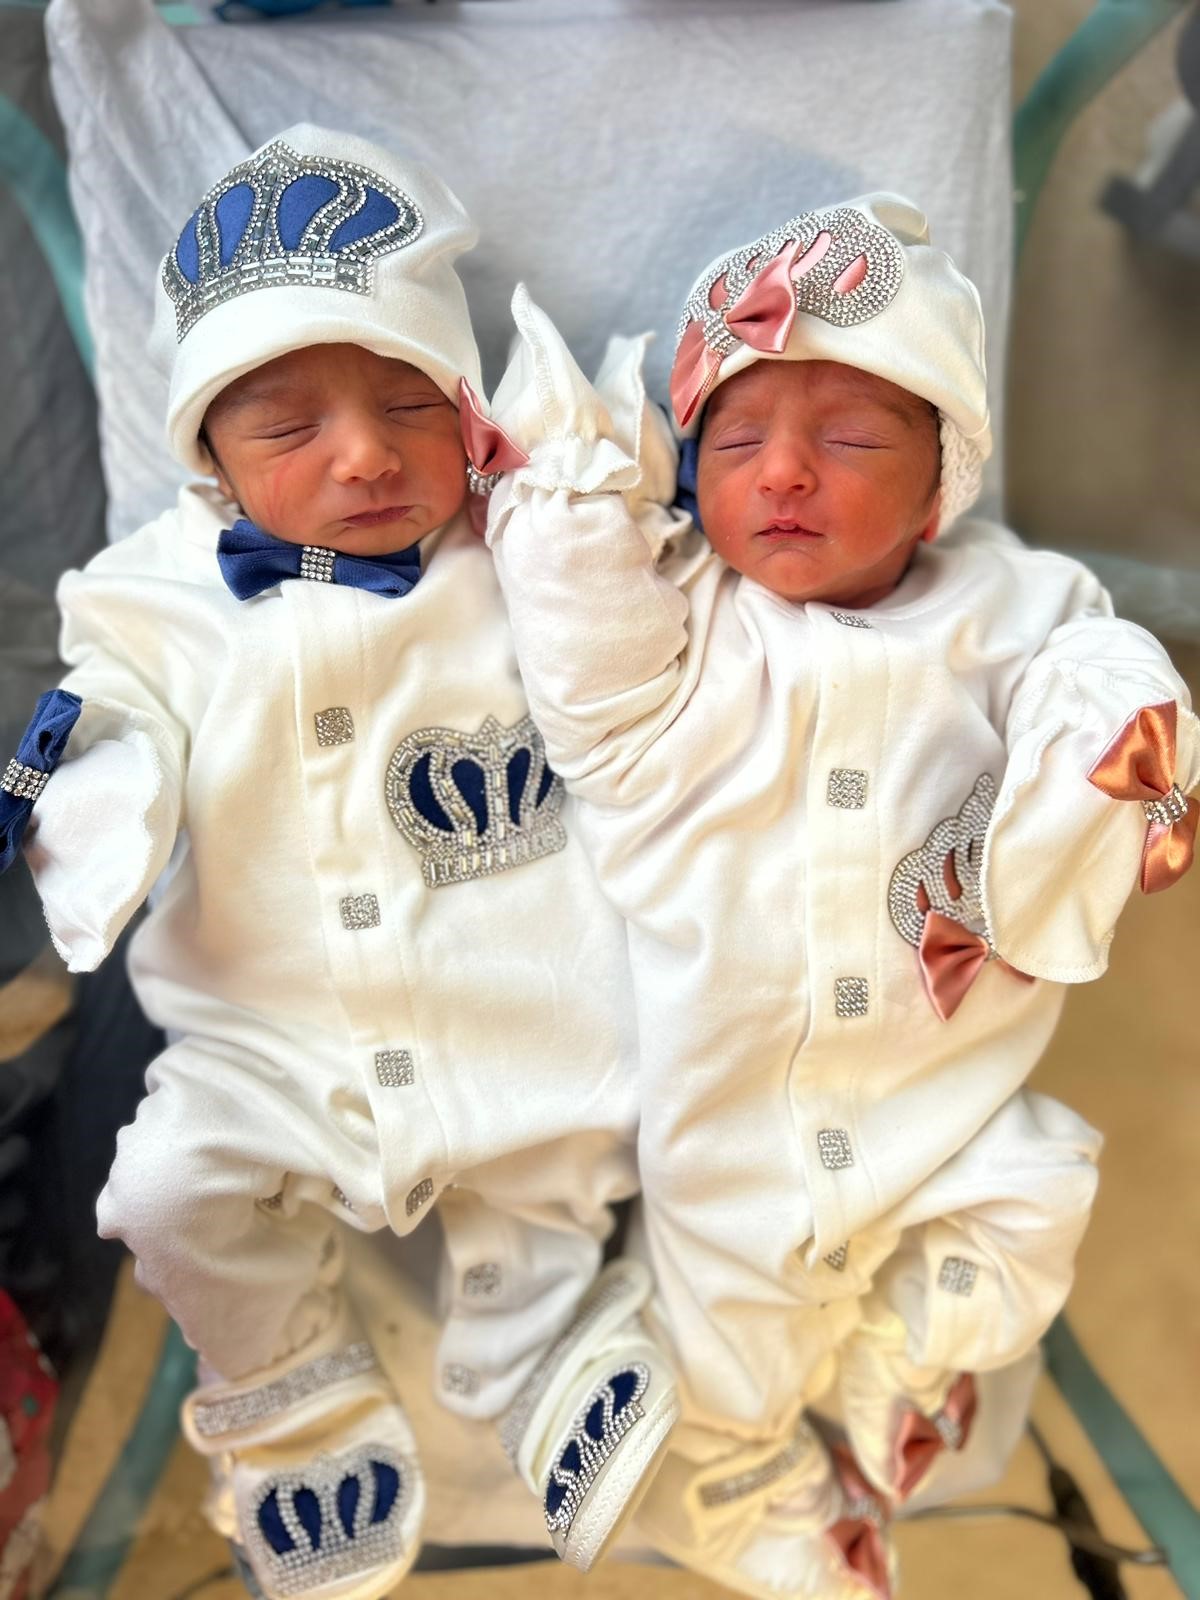 Baby boy Jami and his sister Rumi were born soon after, but will not share the same birthday.